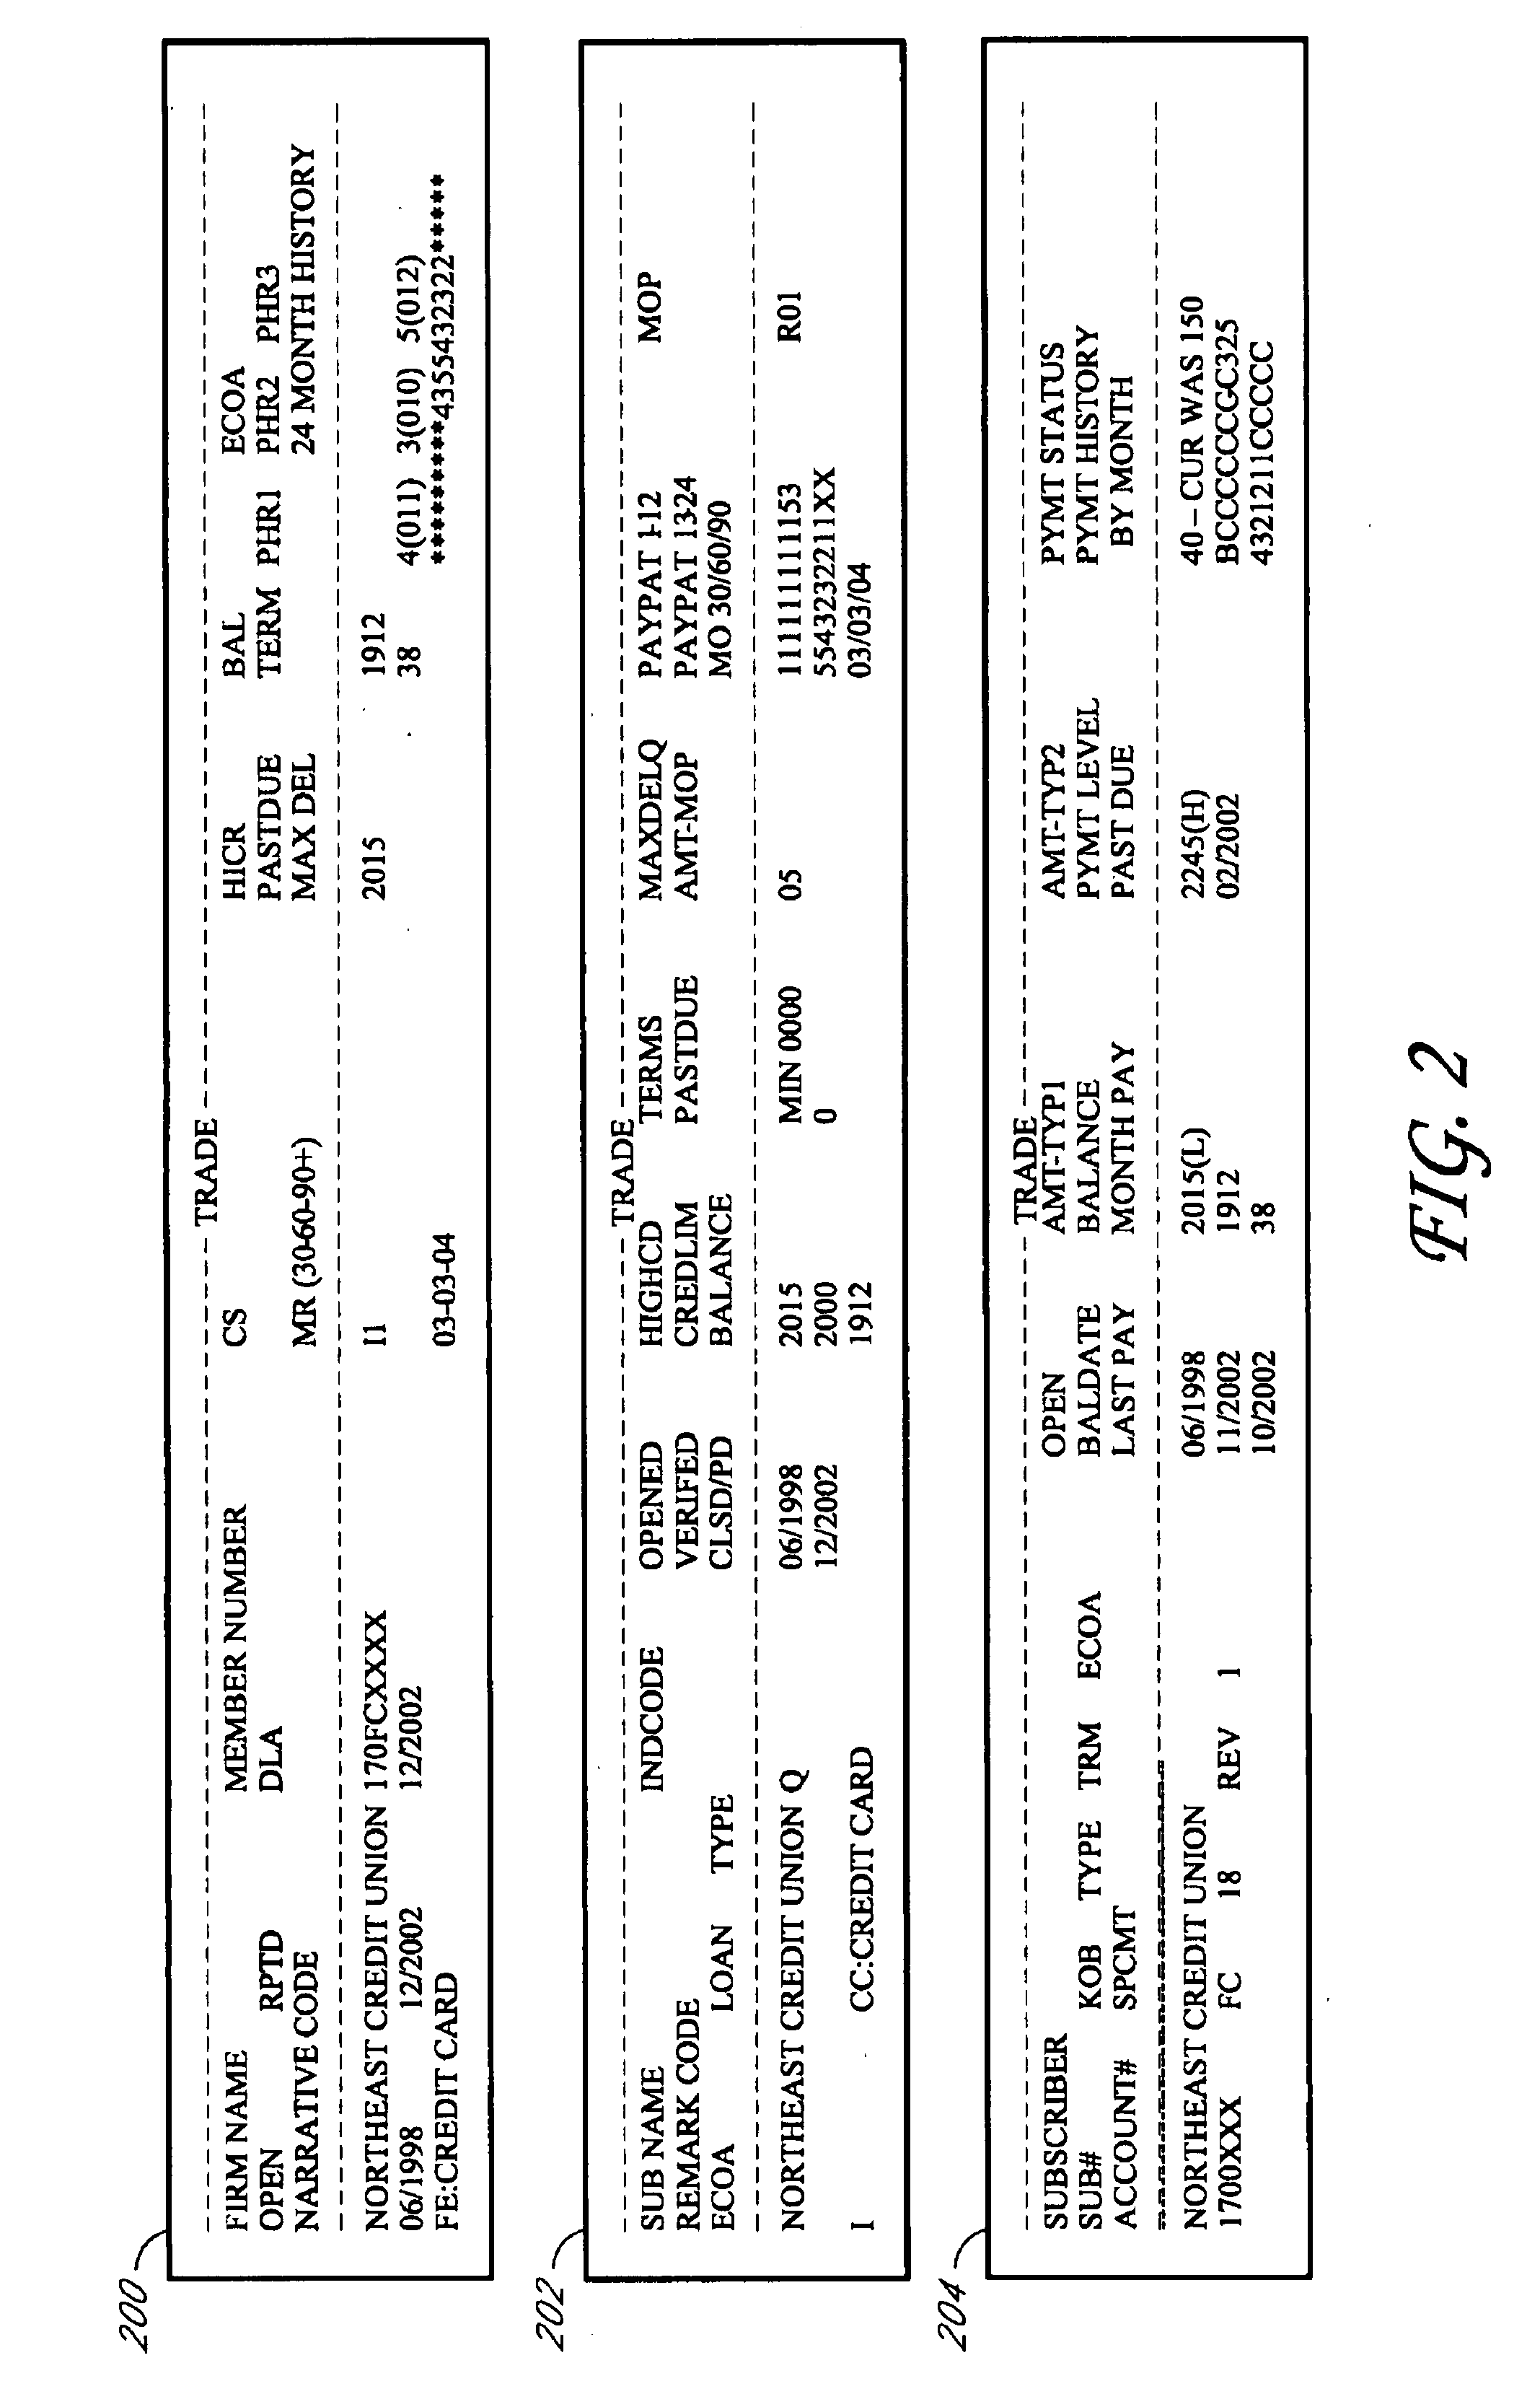 System and method for generating a finance attribute from tradeline data